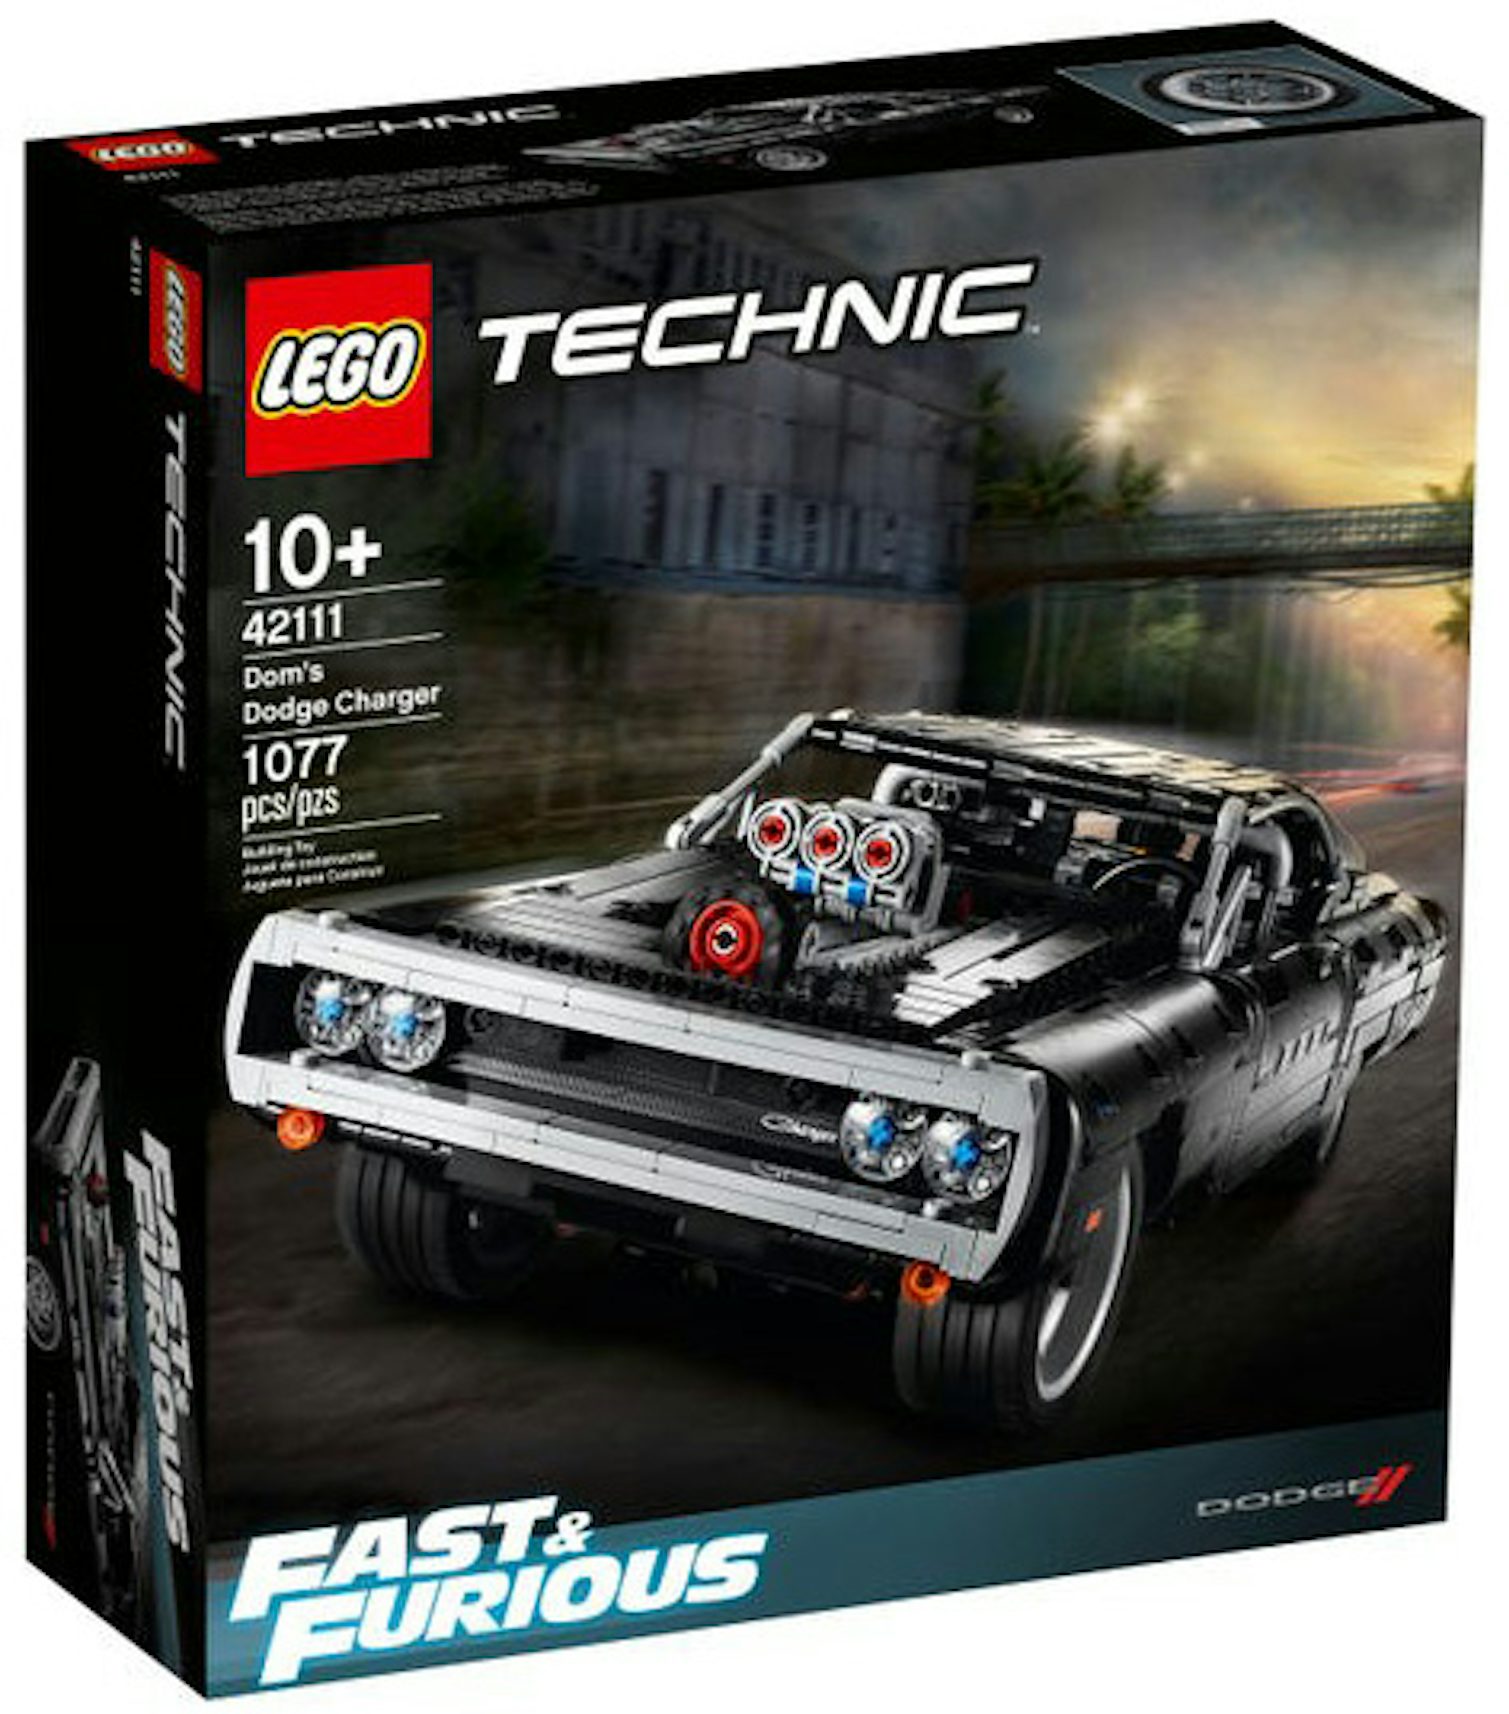 LEGO Technic Fast & Furious Dom's Dodge Charger Set 42111 - US